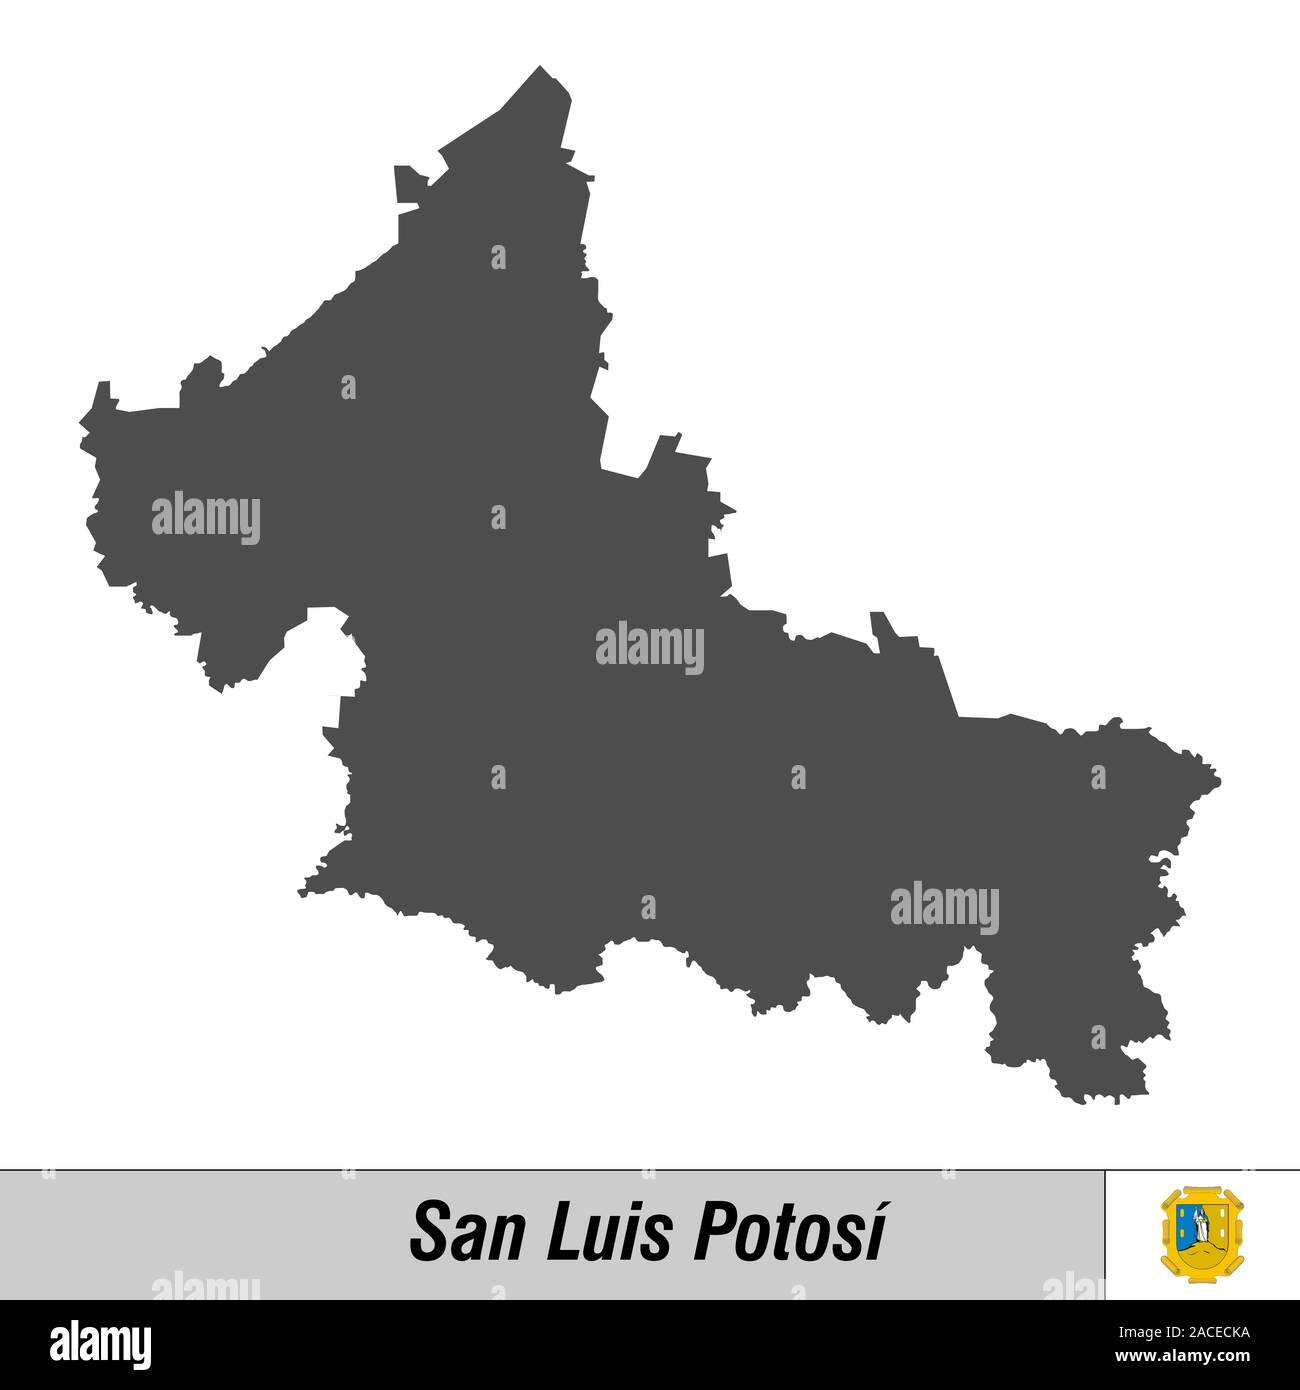 High quality map with flag state of Mexico - San Luis Potosi Stock Vector